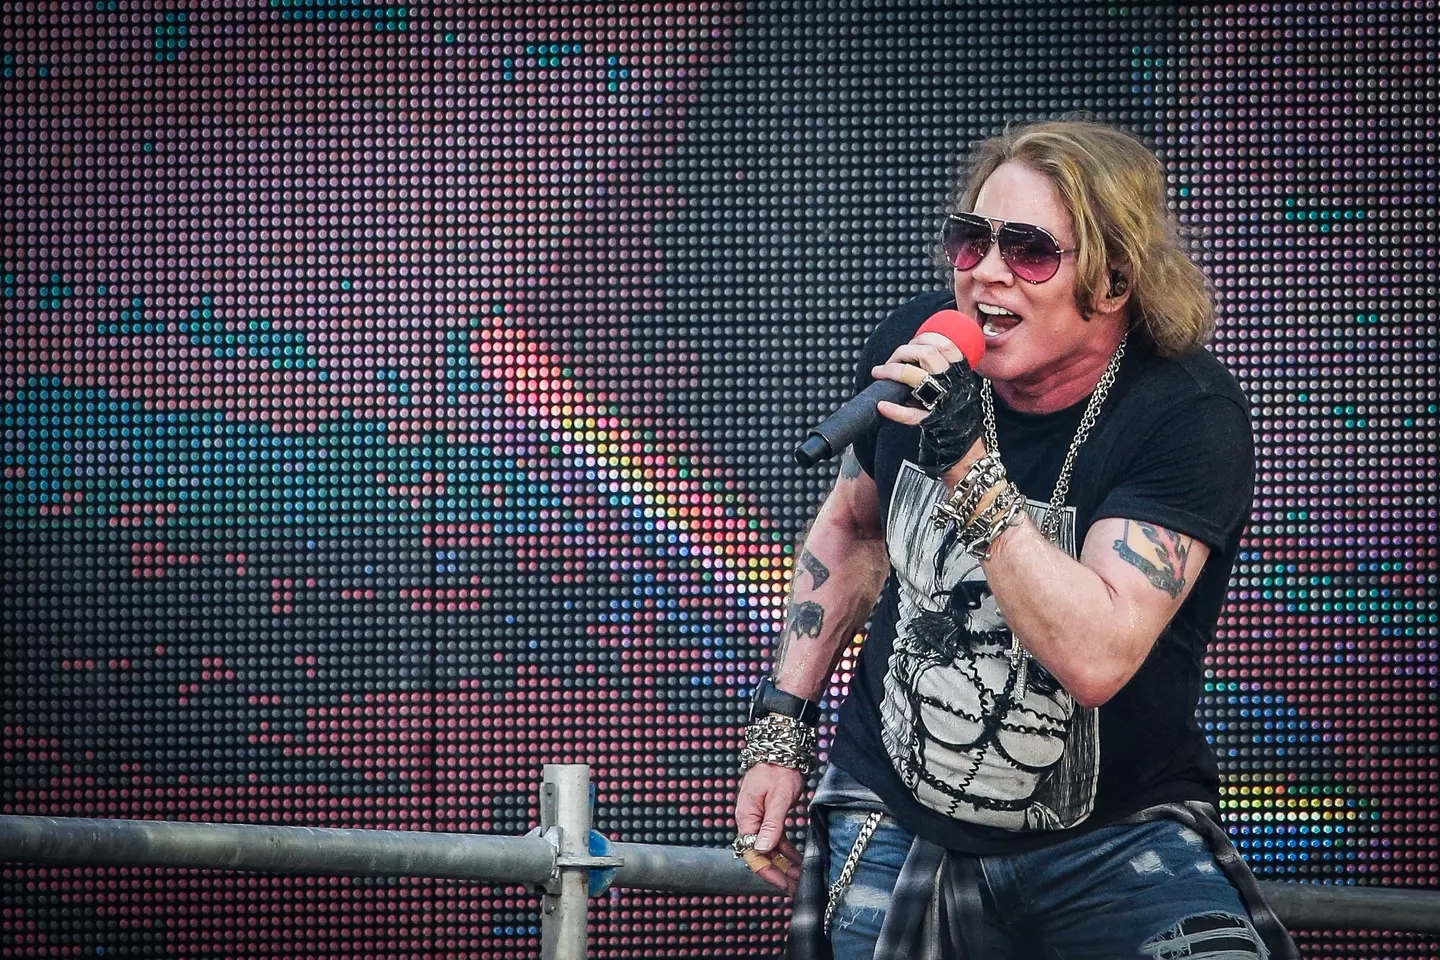 Axl Rose says he won't throw his mic at any more gigs.